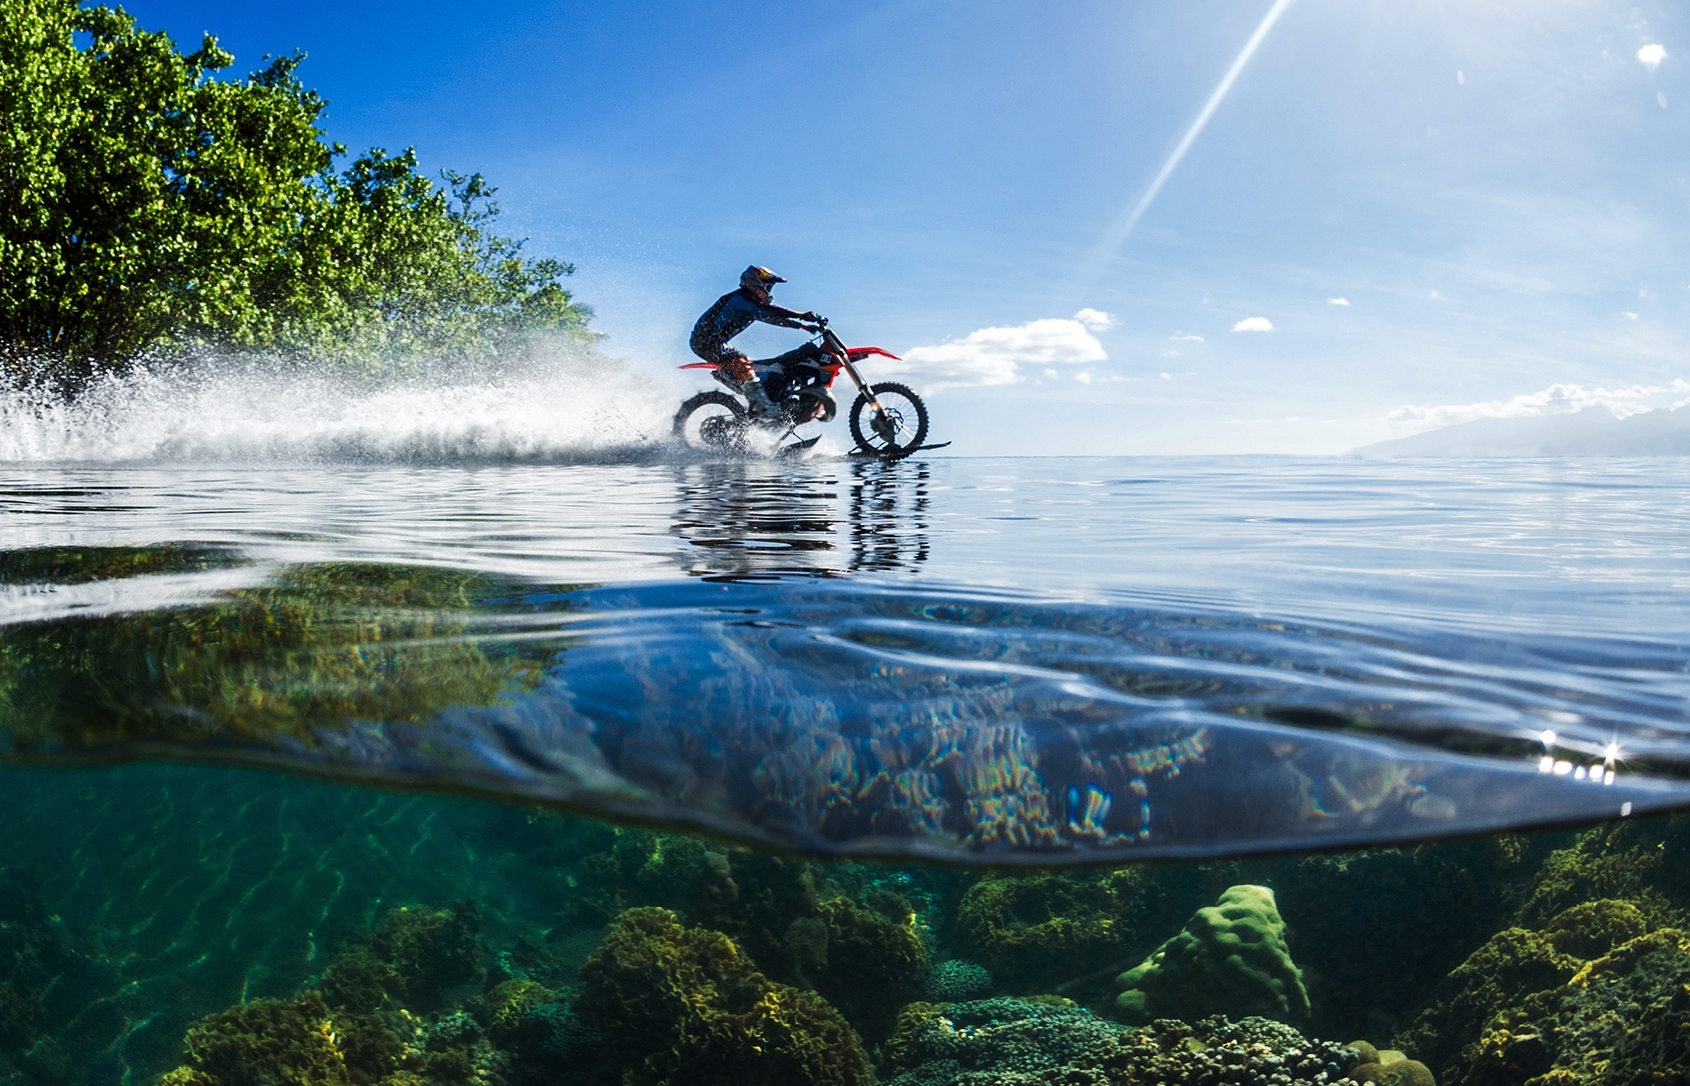 In this April, 2015, photo provided by DC Shoes, daredevil Robbie Maddison in his latest stunt rides his motorcycle across waves in Tahiti, French Polynesia, using ski-like devices on his wheels.  (Tim McKenna/DC Shoes via AP)